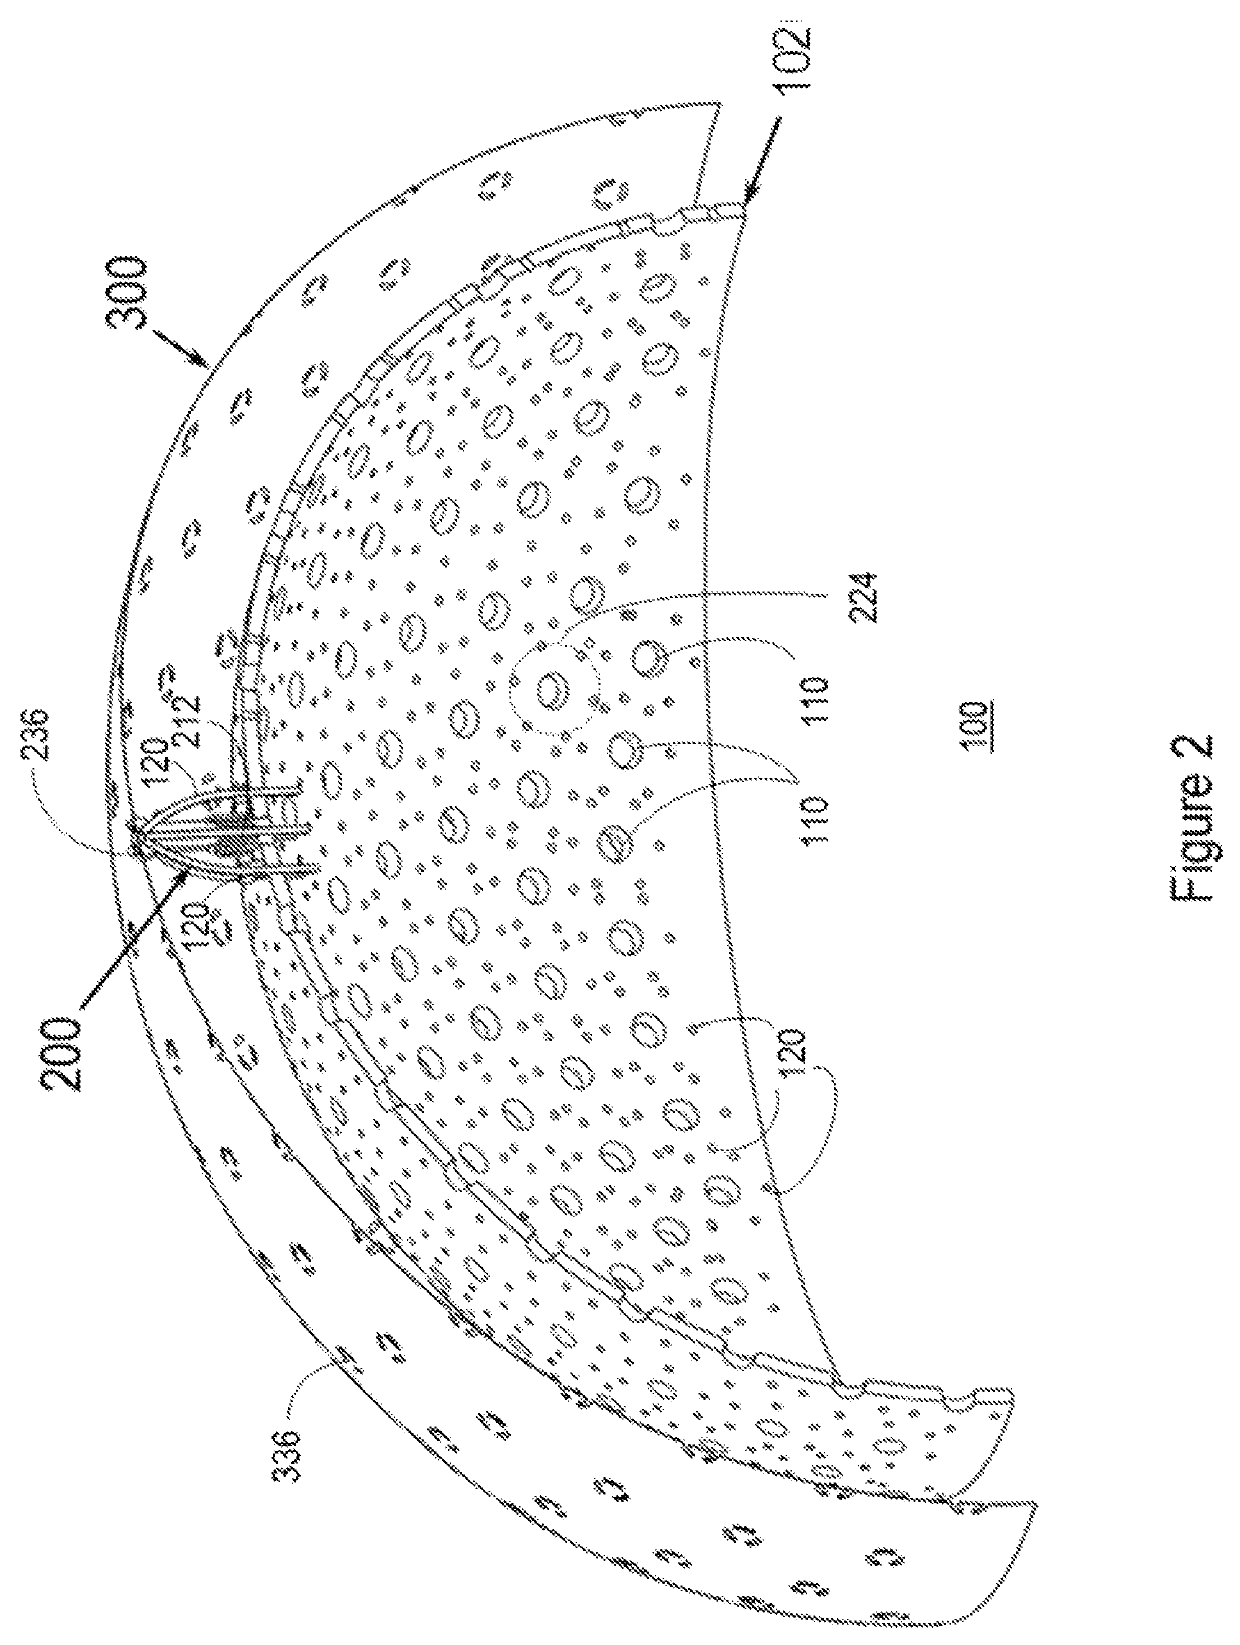 Light based therapy devices and methods